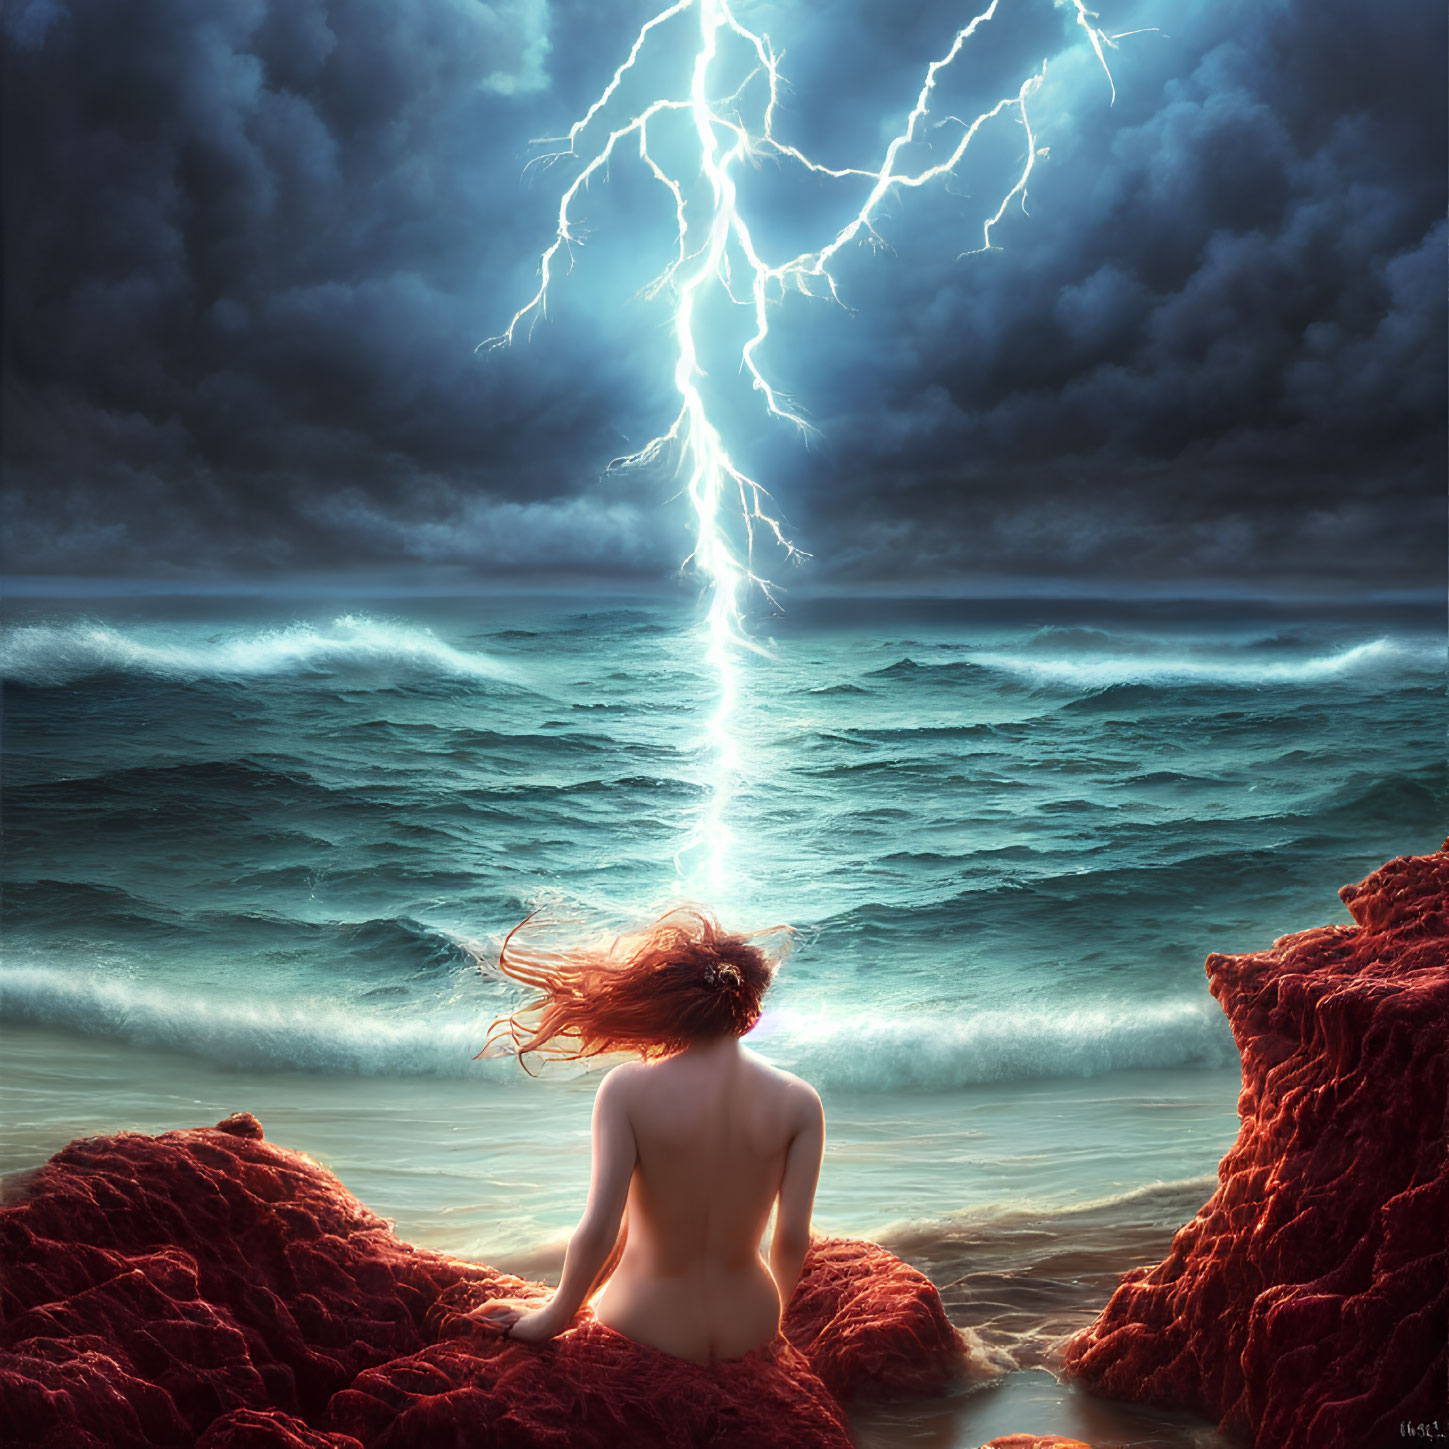 Person sitting on red rocks by stormy sea with lightning bolt in dark sky